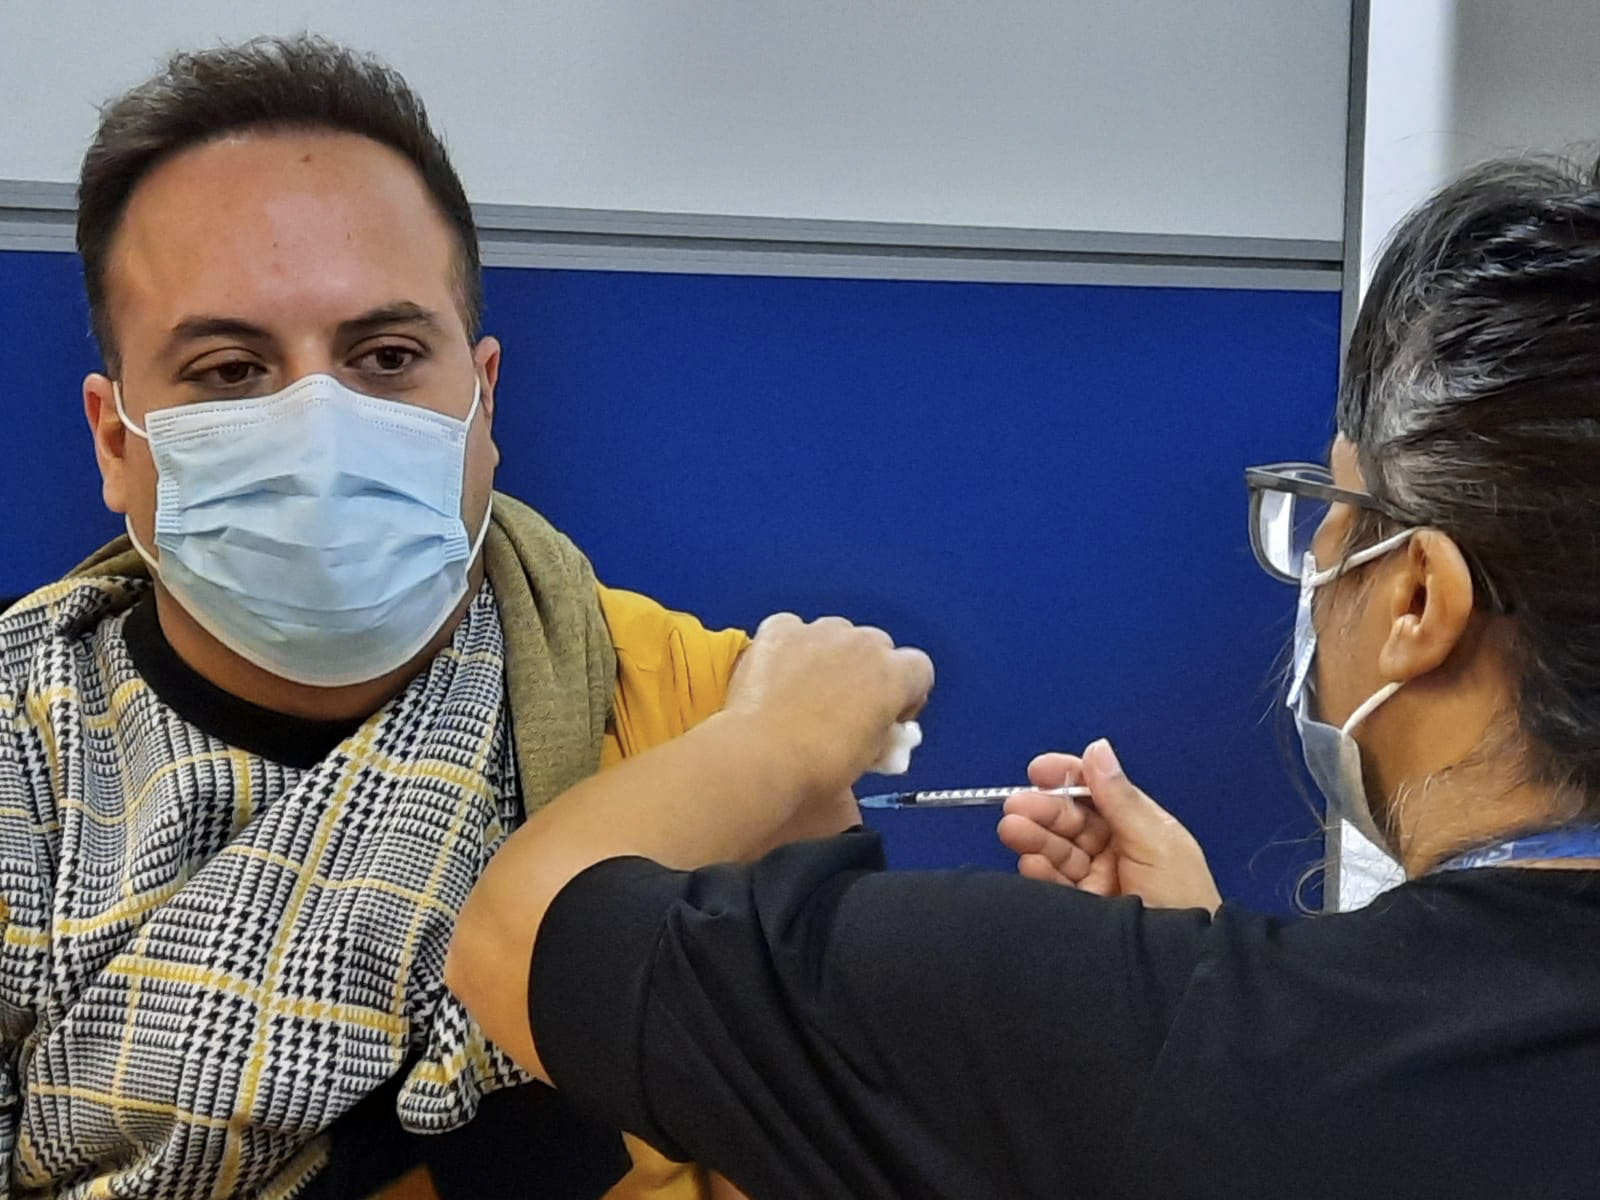 Man wearing mask being given vaccine